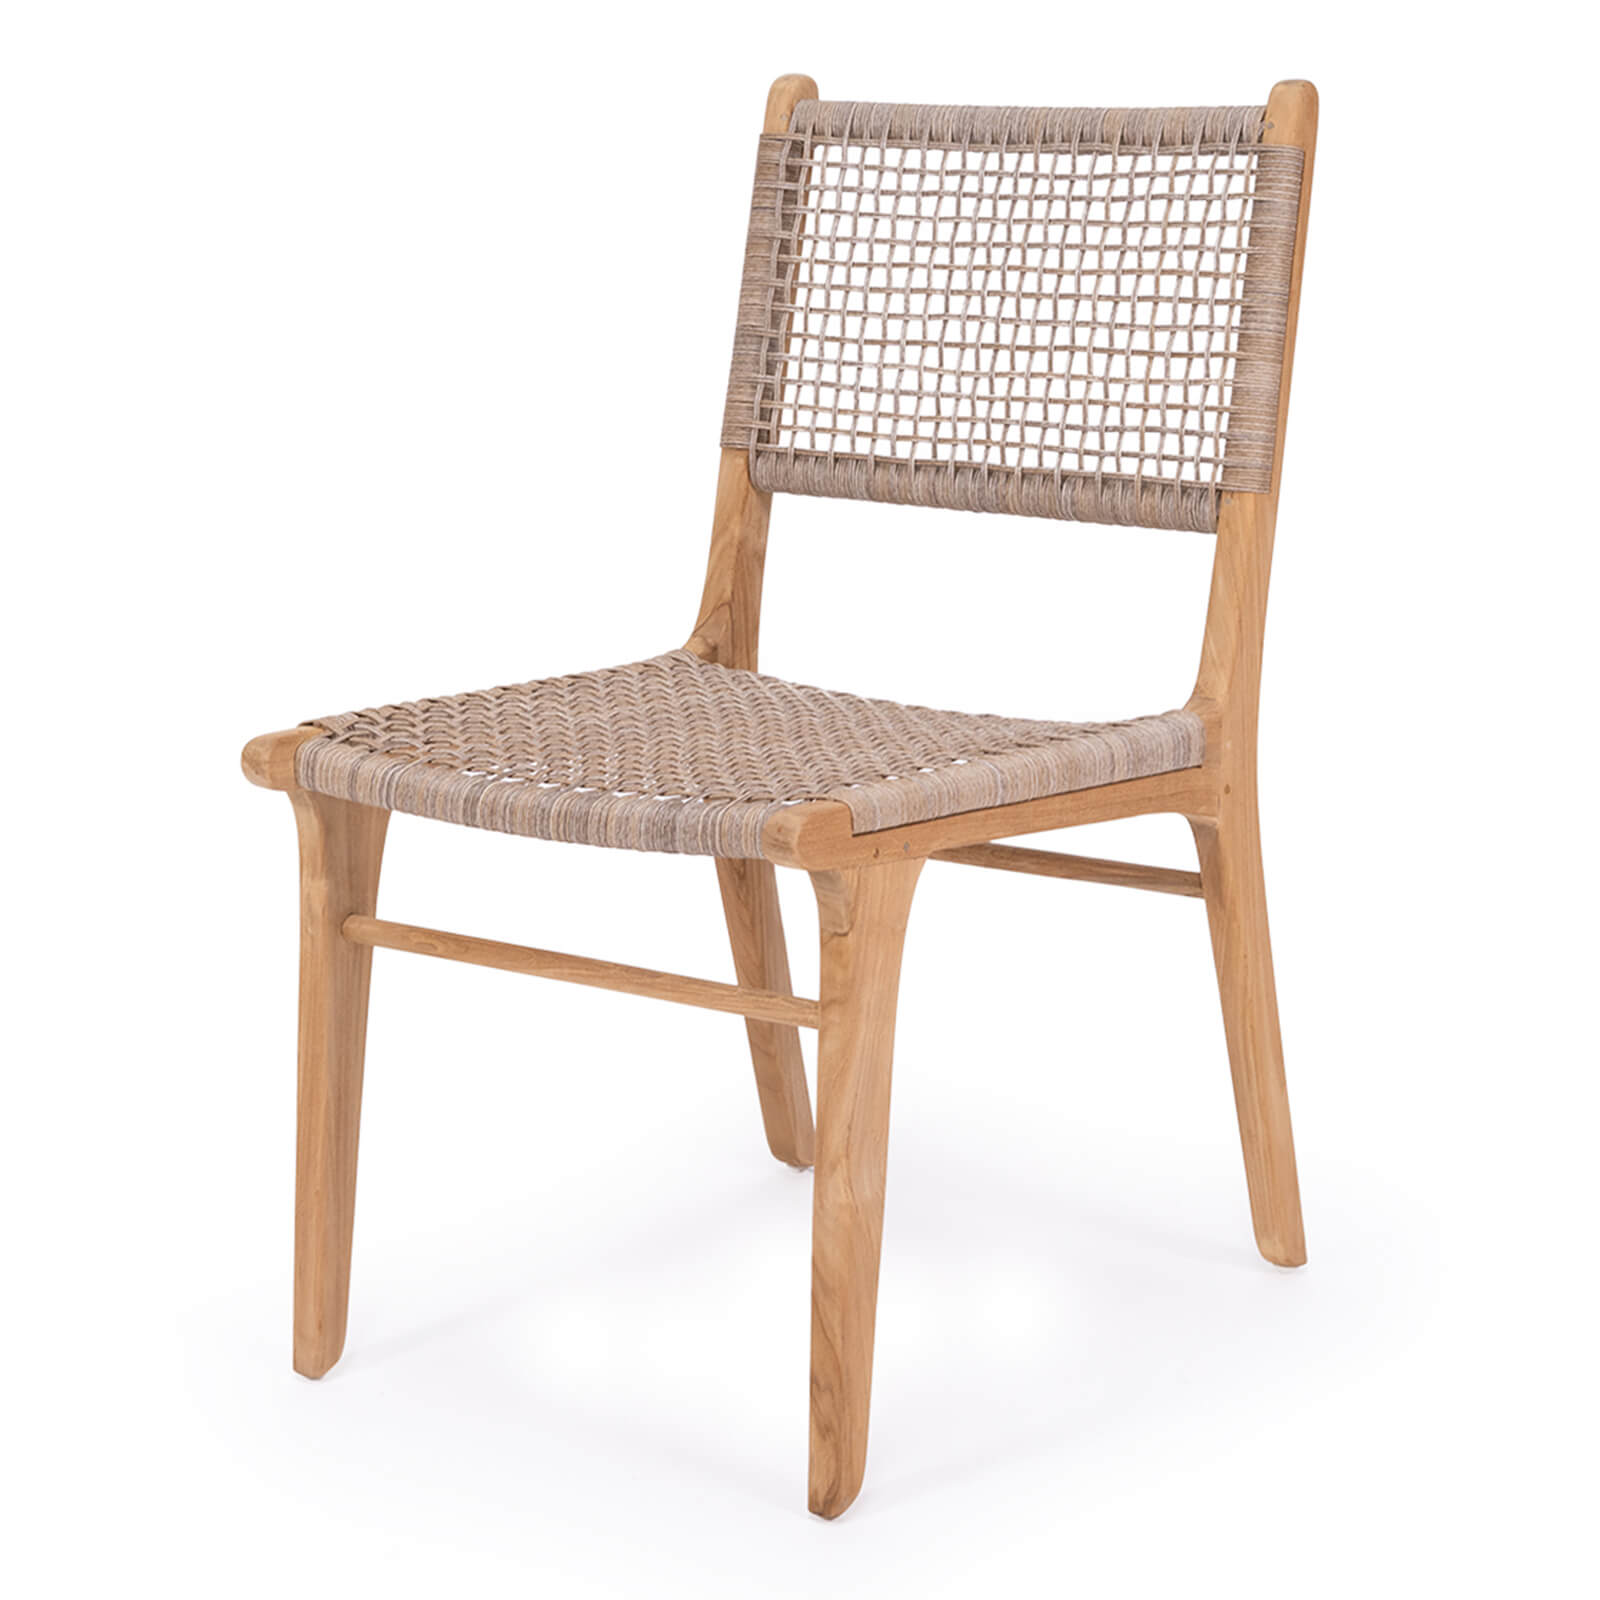 Augusta | Coastal, Mid Century Outdoor Wooden Dining Chair | Washed Grey